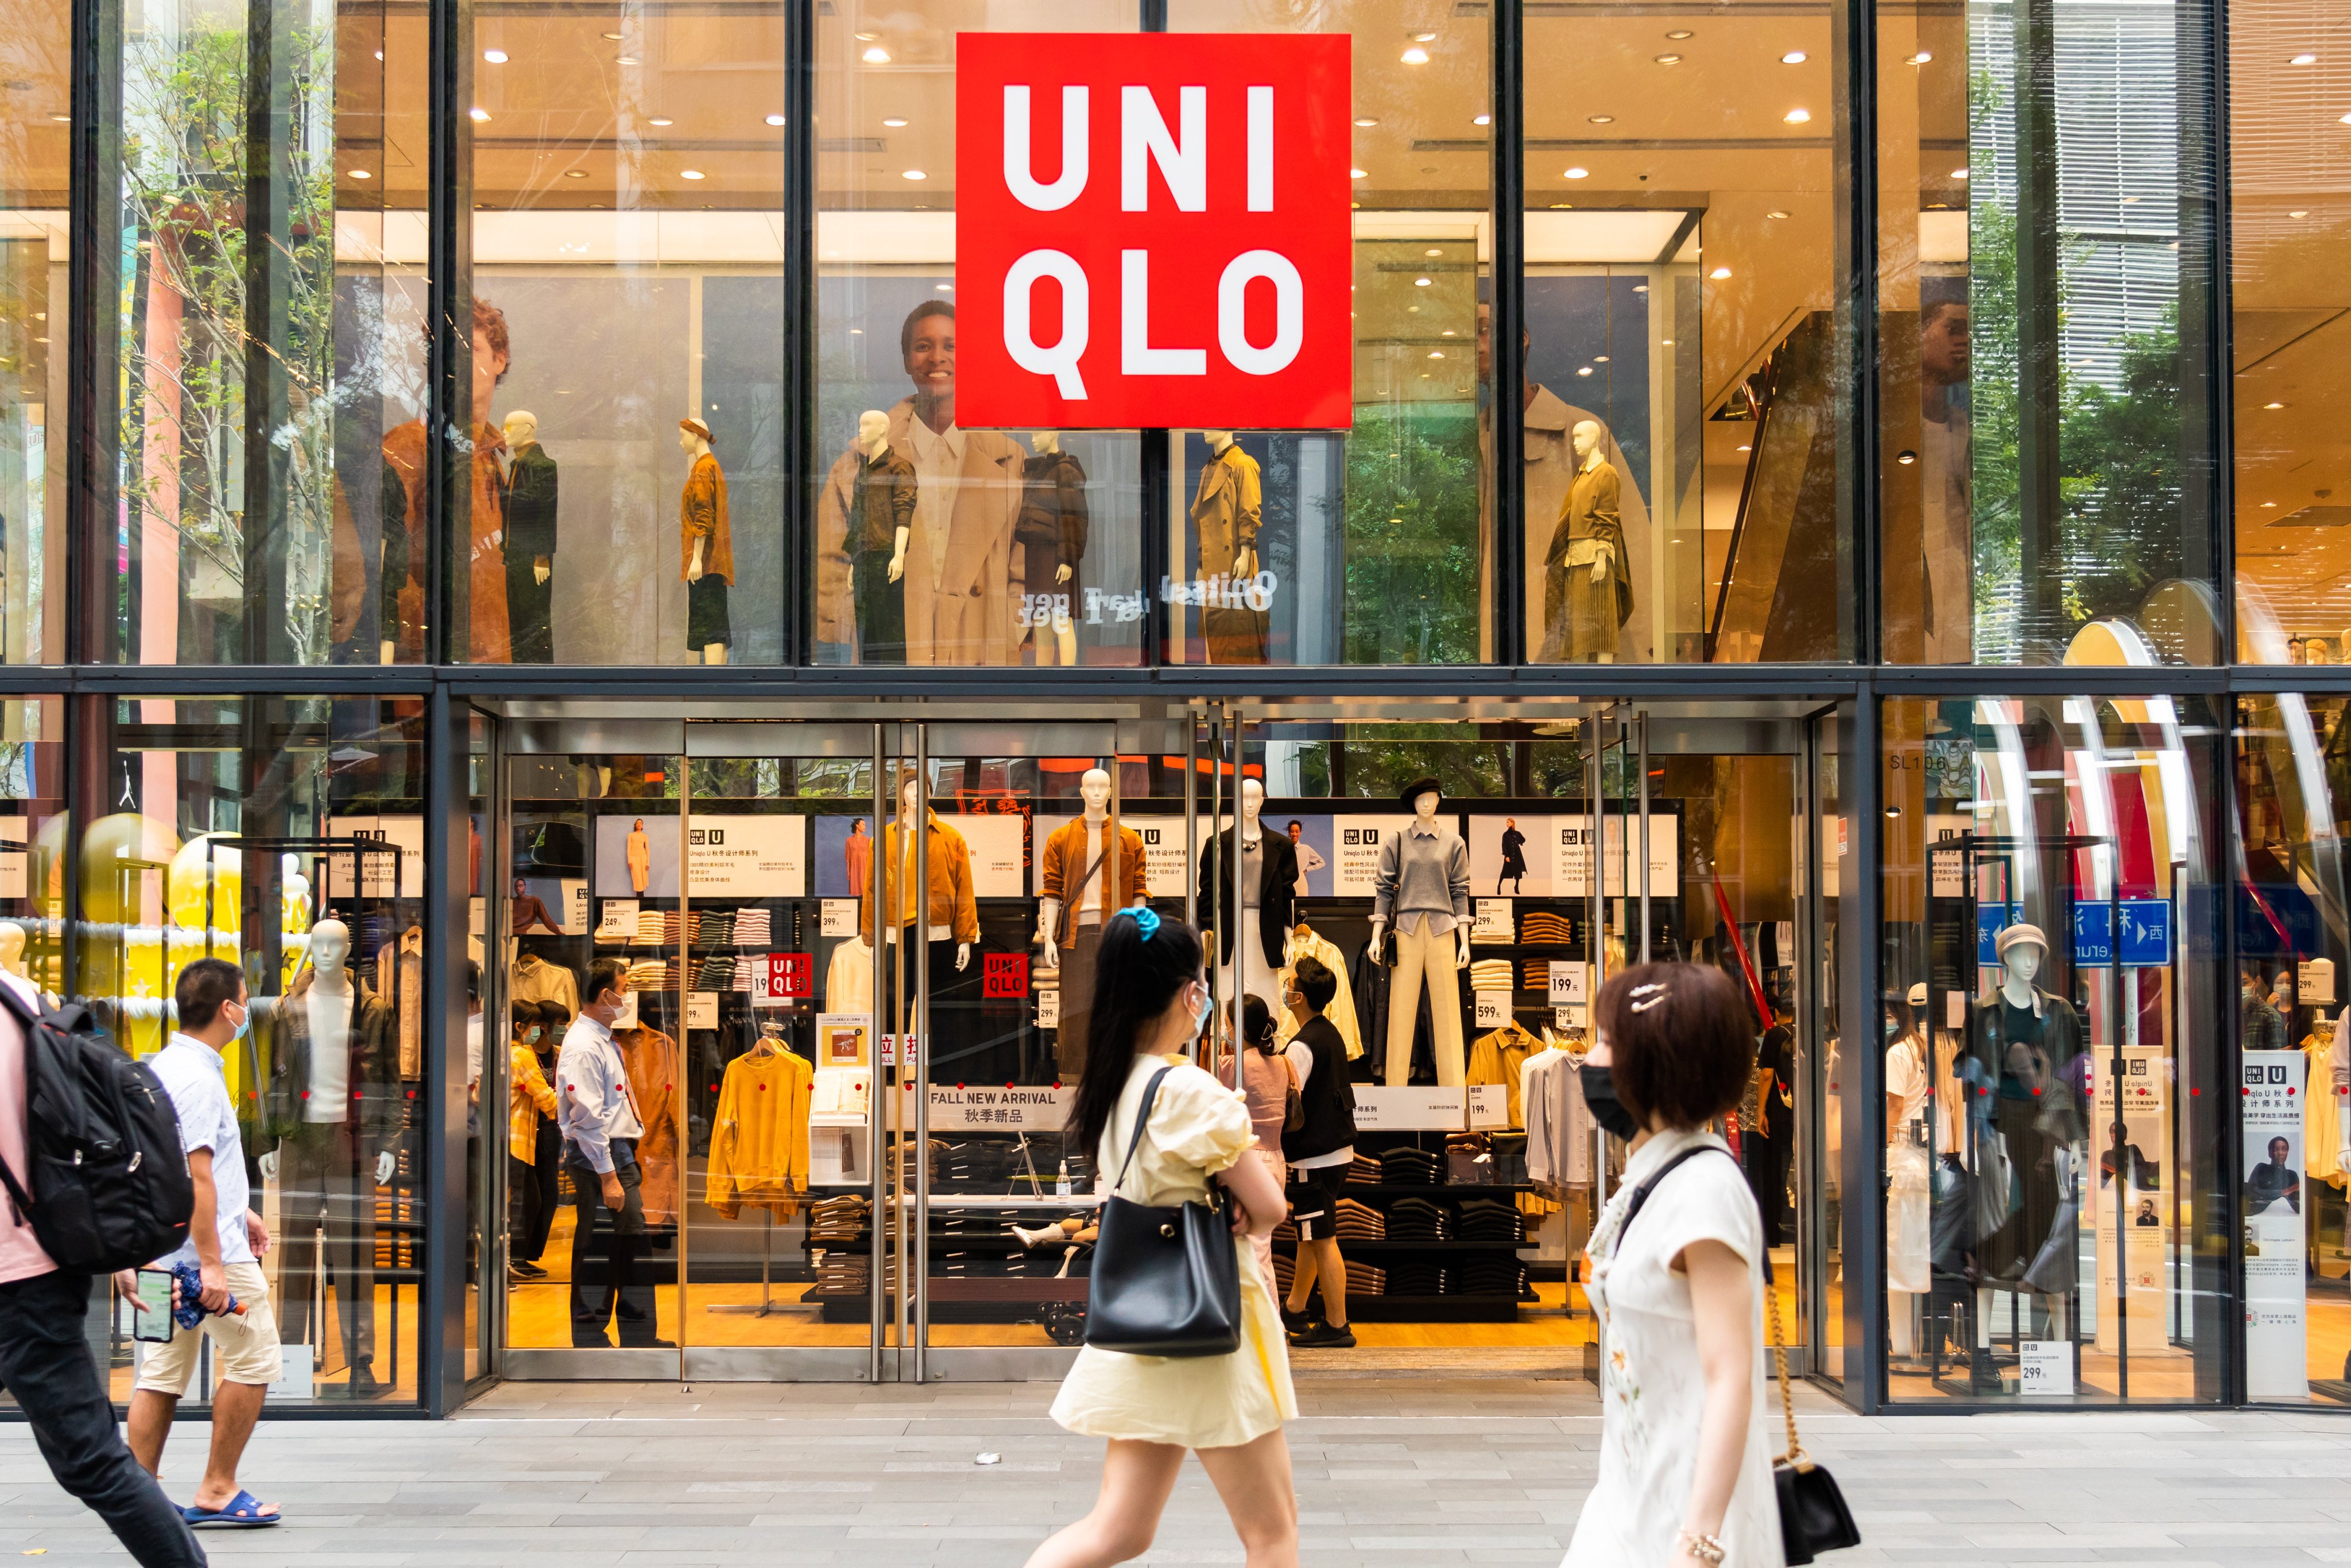 A Uniqlo store in Shenzhen, China. Photo Getty Images